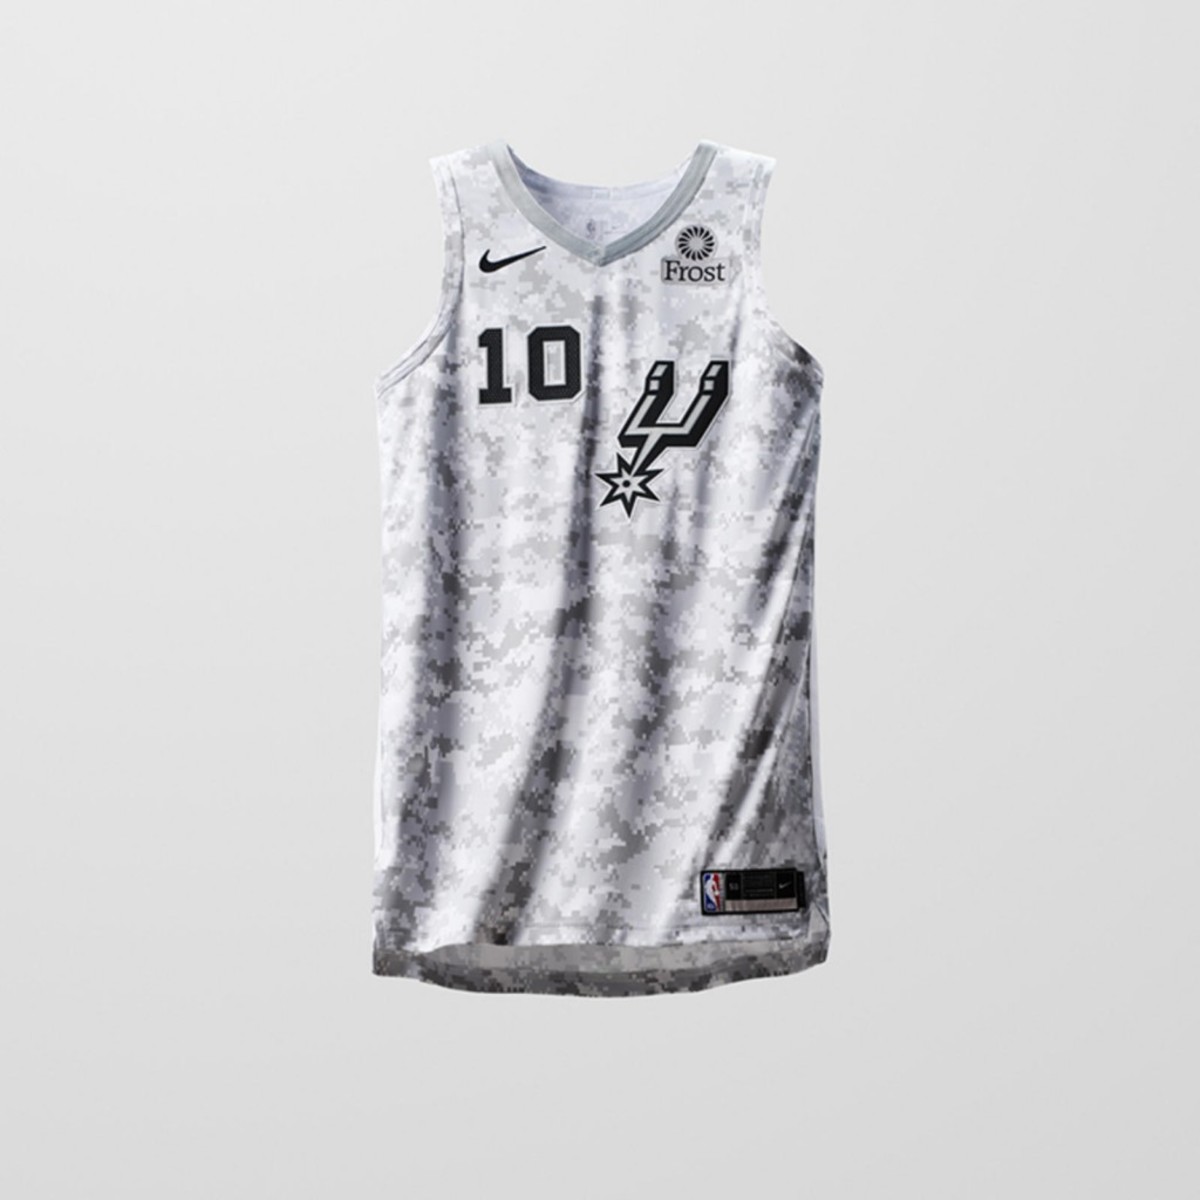 lakers earned edition jersey